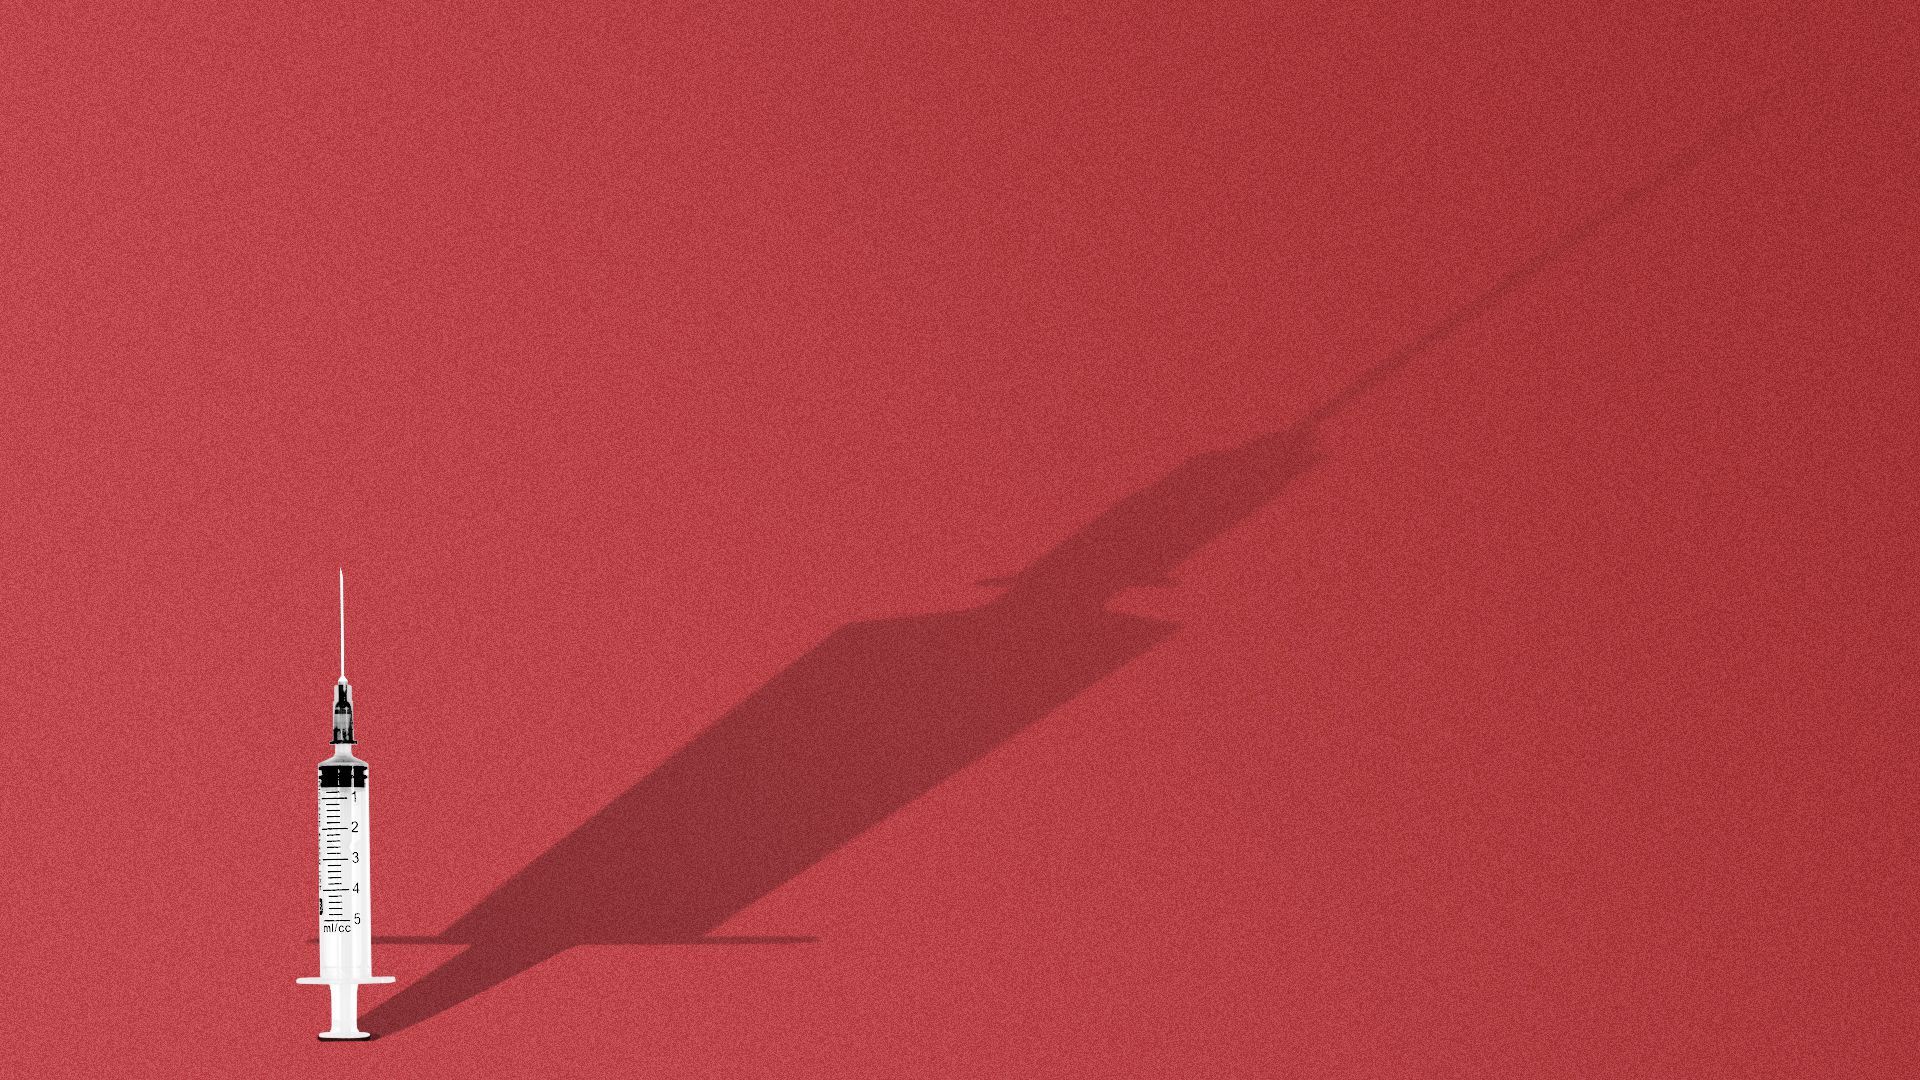 Illustration of a small syringe casting a large shadow.